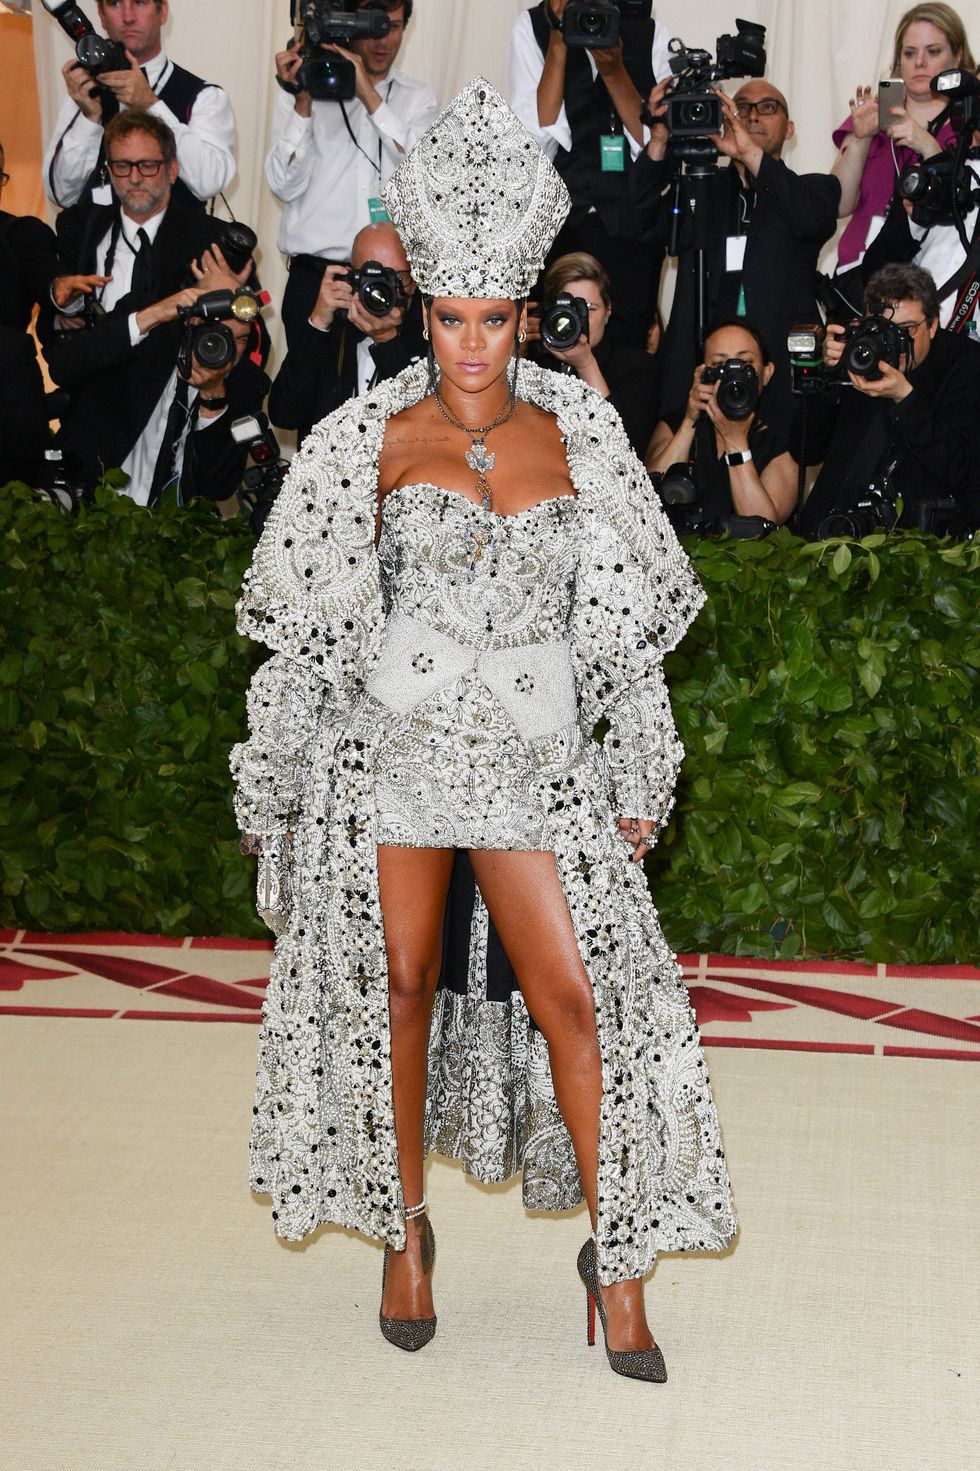 rihanna at the 2018 met gala themed "heavenly bodies fashion and the catholic imagination" costume institute gala